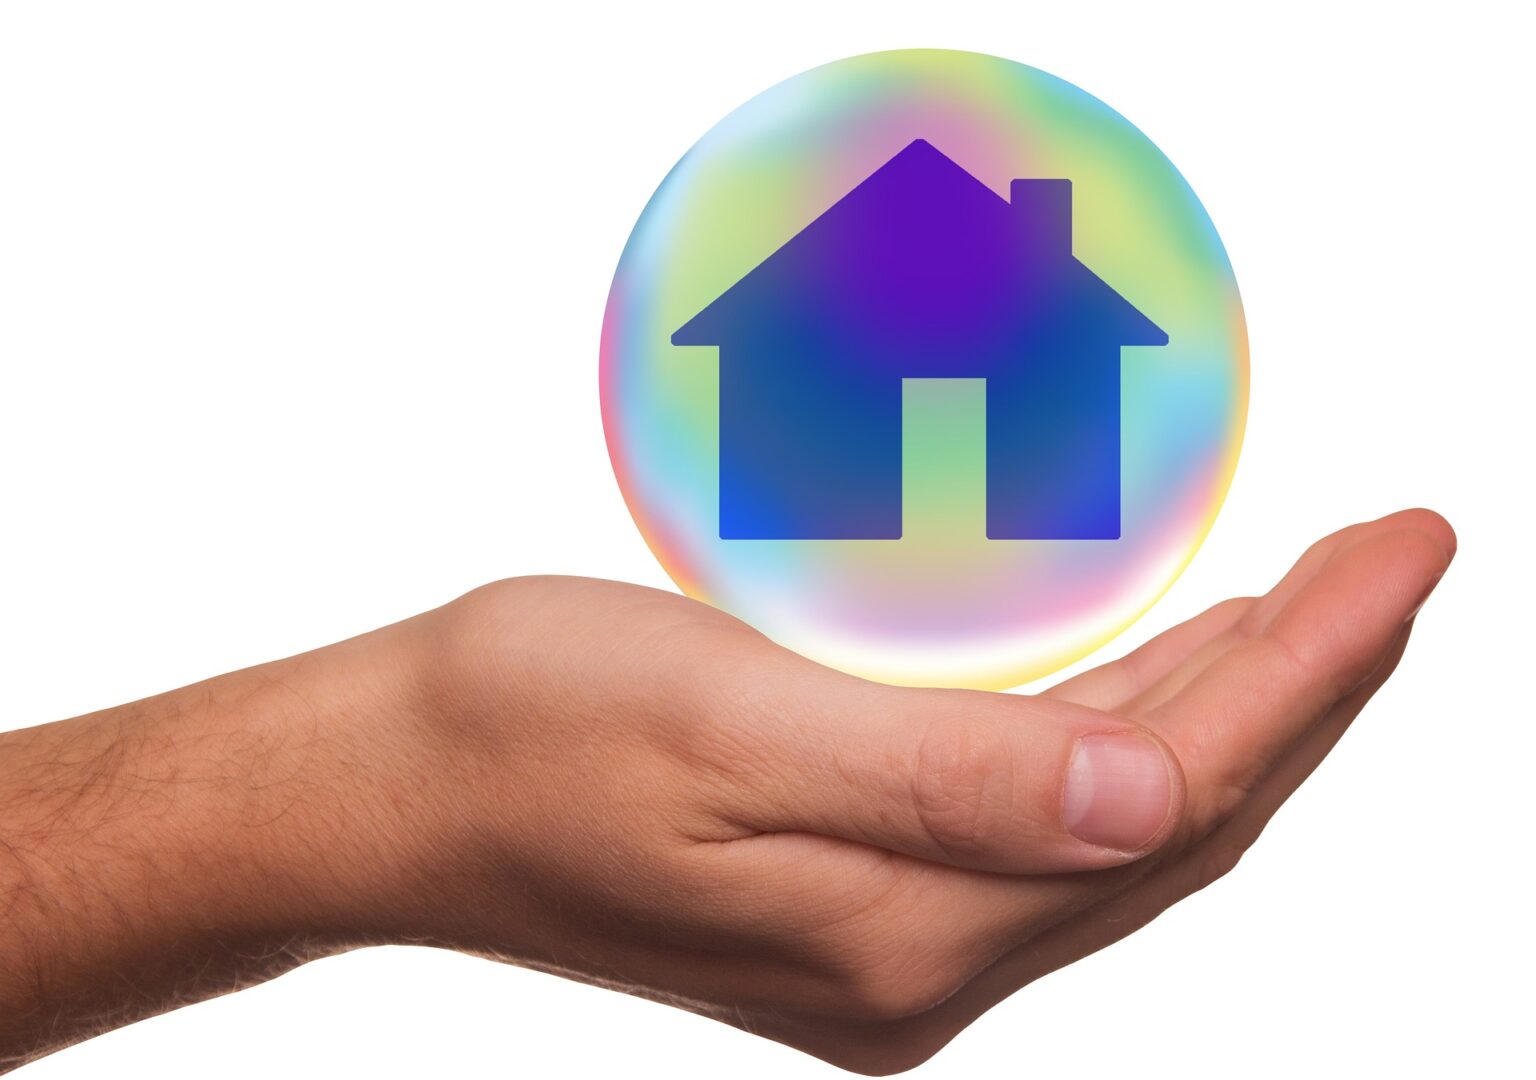 Hand holding bubble which is having image of a Home model inside of it